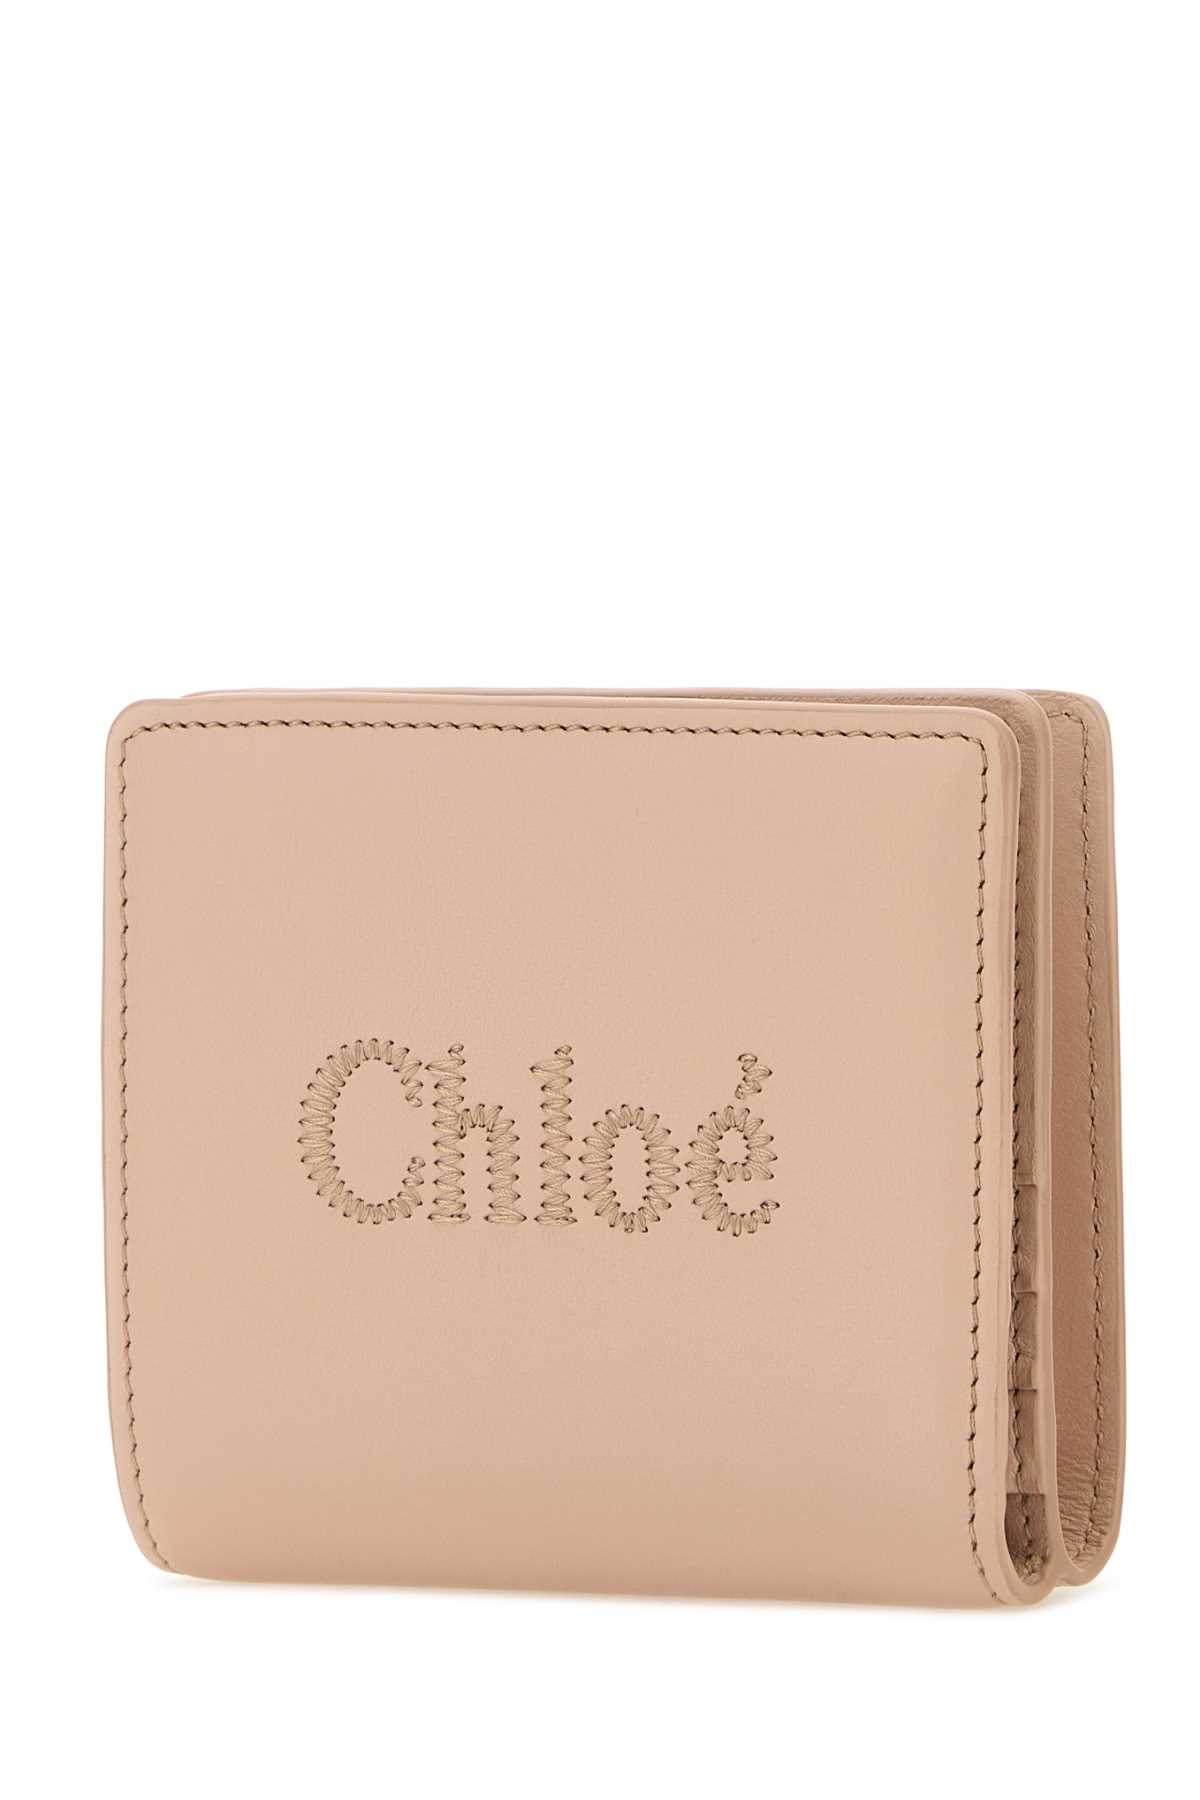 CHLOÉ SKIN PINK LEATHER WALLET